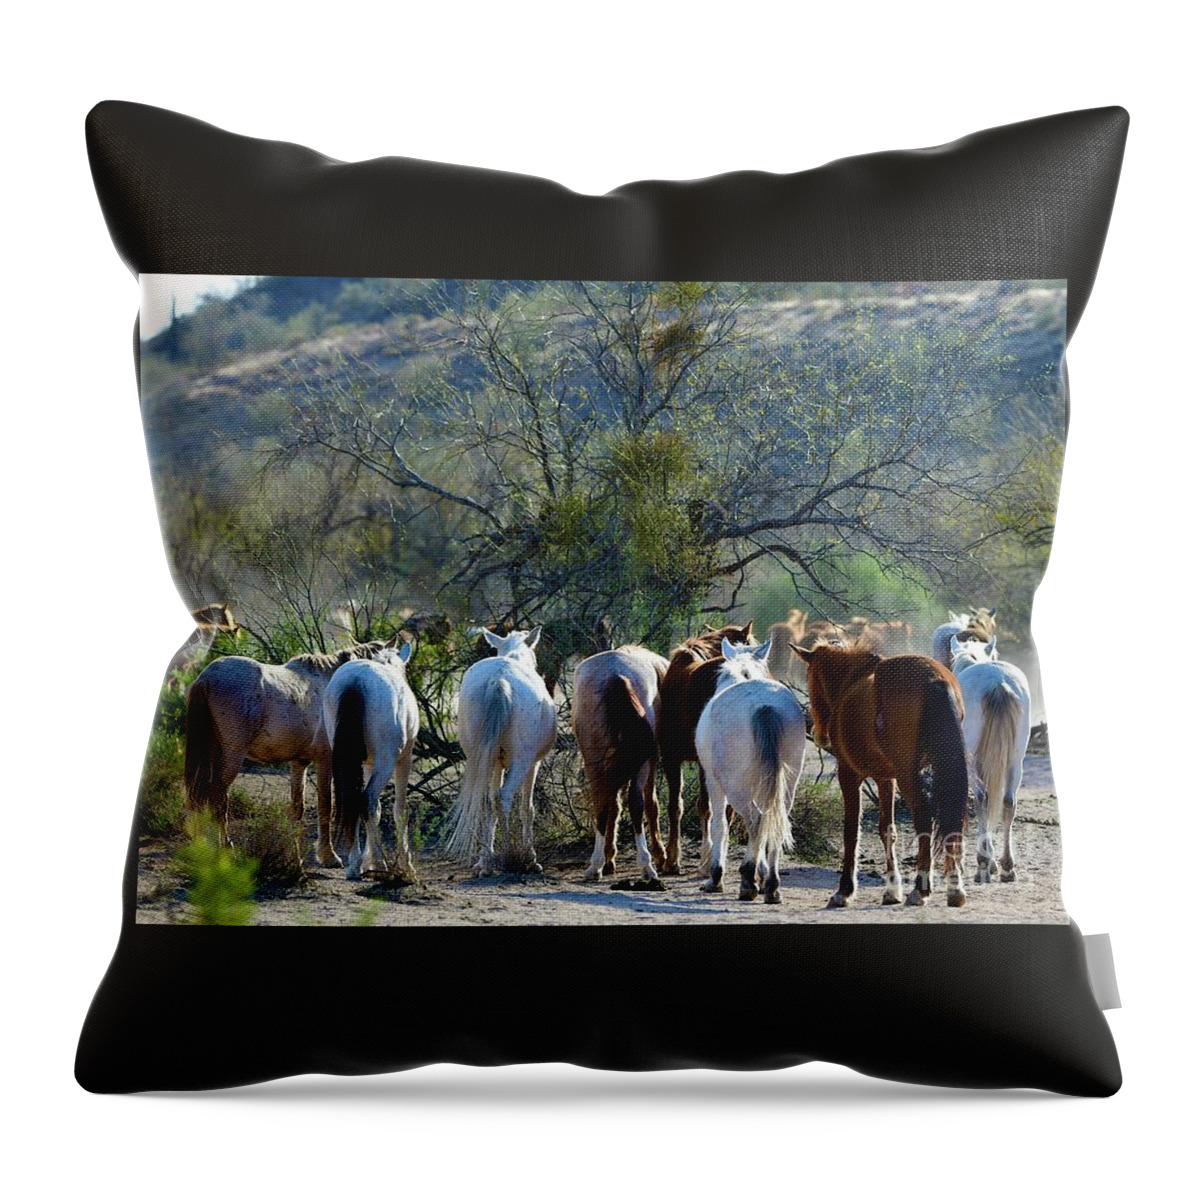 Horse Trail Tails Throw Pillow featuring the digital art Horse Trail Tails by Tammy Keyes